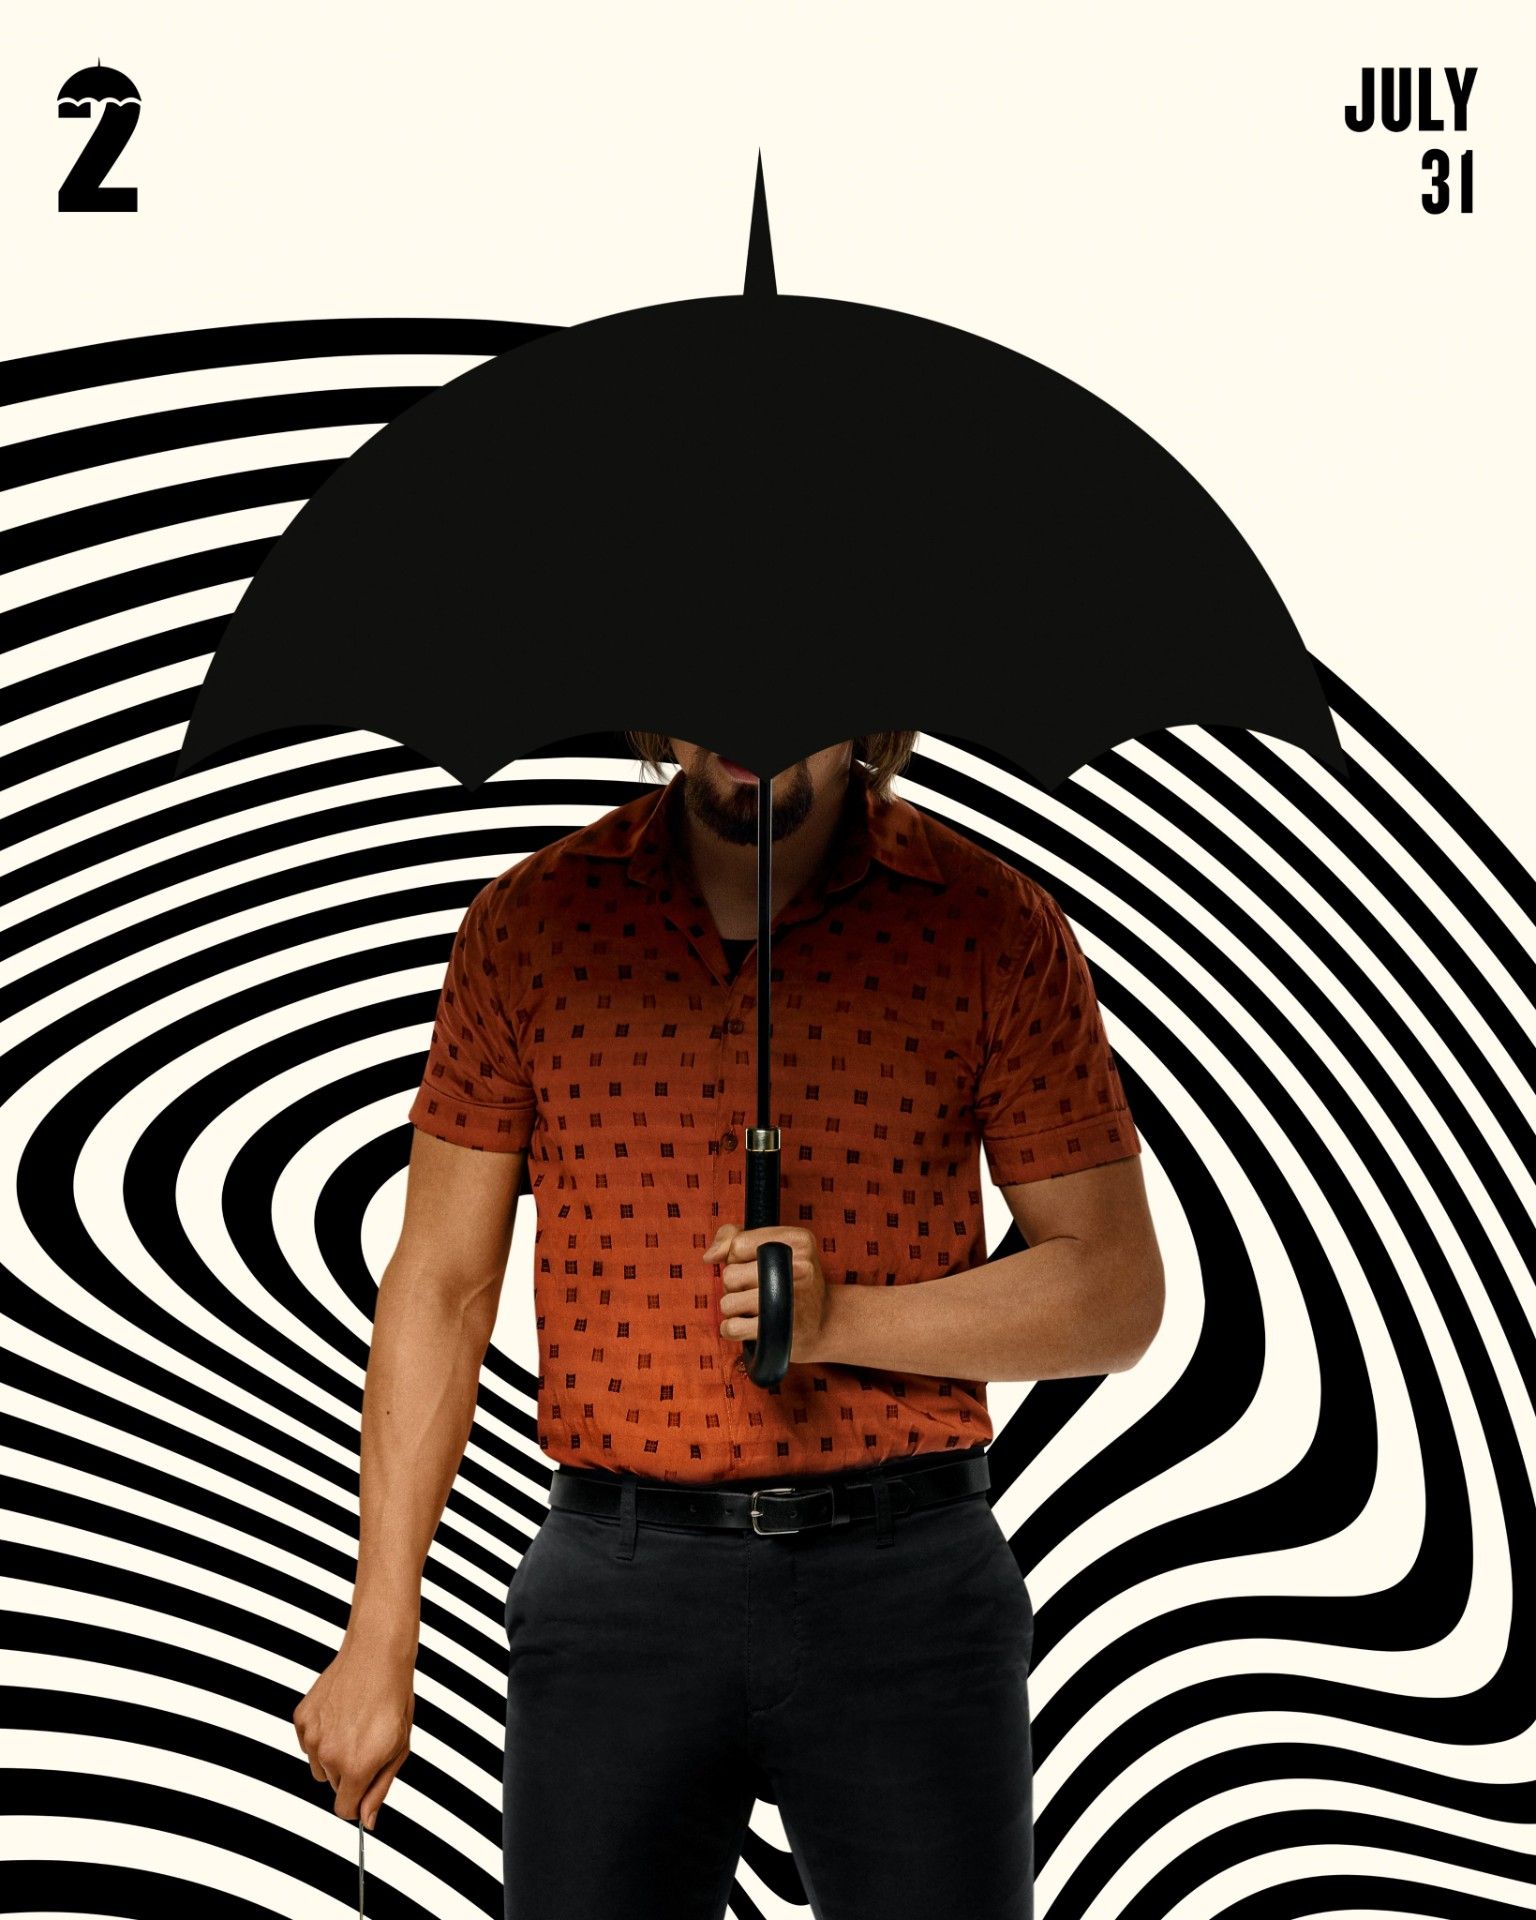 The Umbrella Academy Two Diego poster